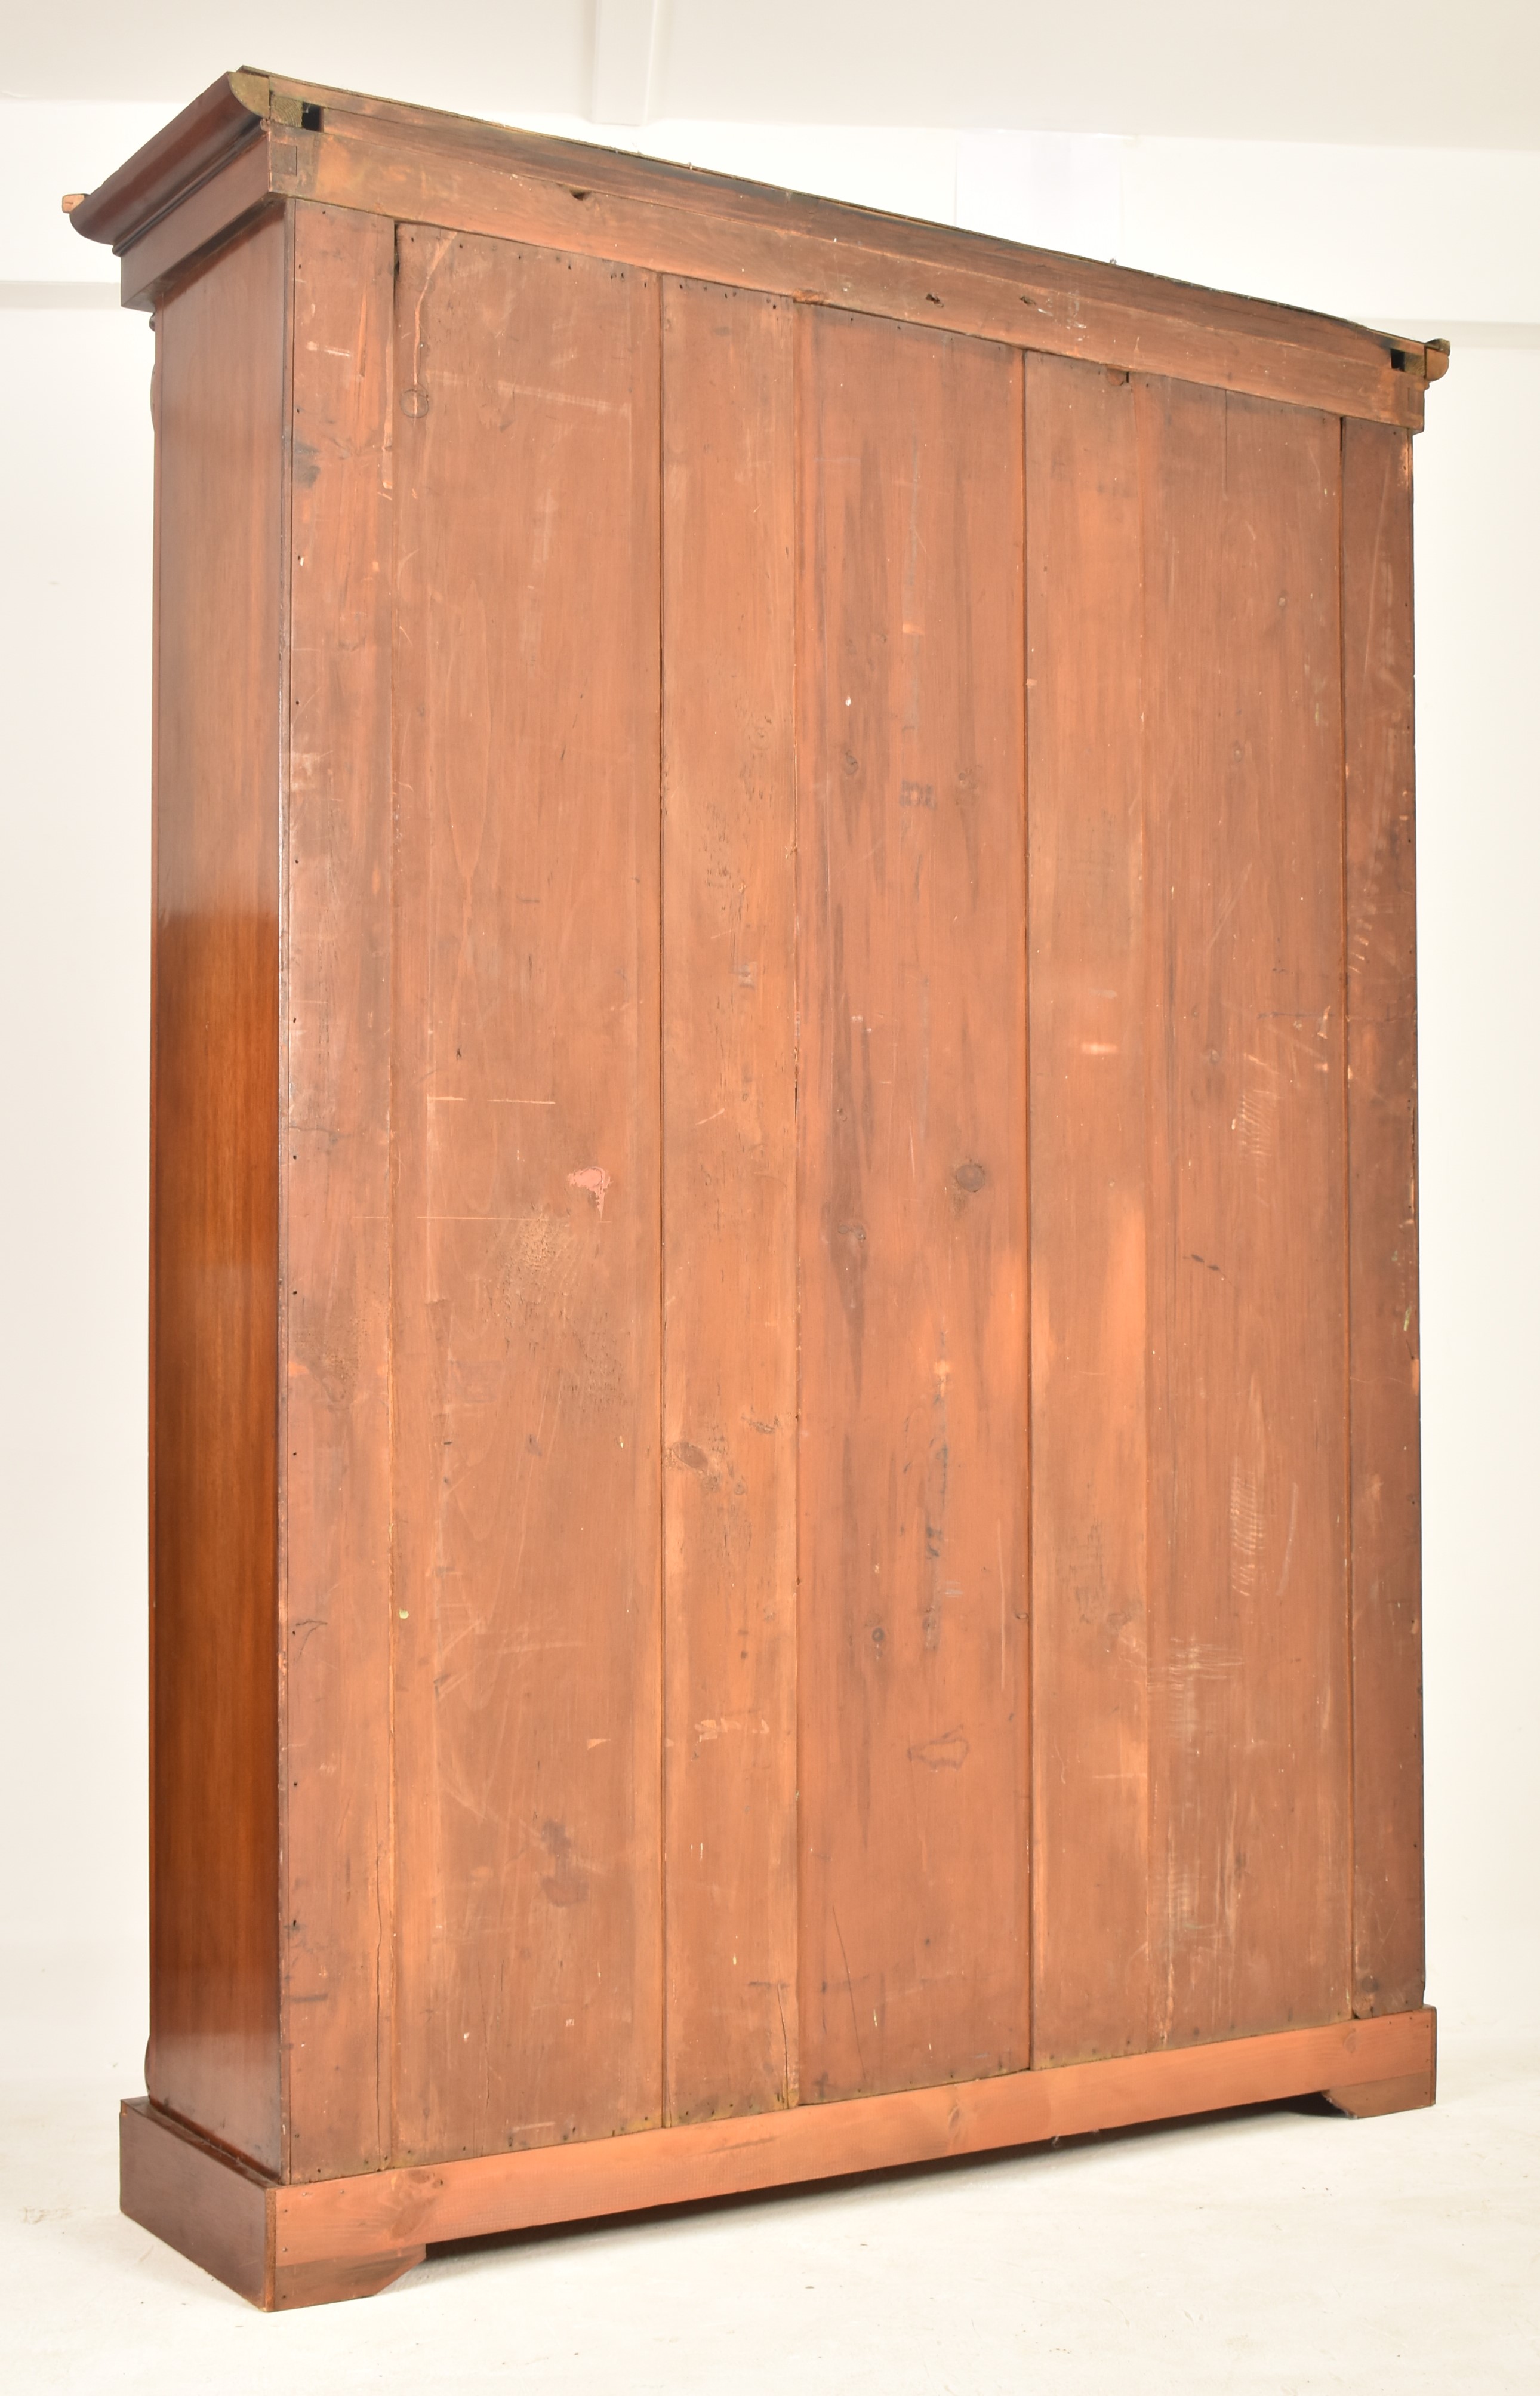 VICTORIAN MAHOGANY & LEATHER ARCADE OPEN FRONT BOOKCASE - Image 6 of 6